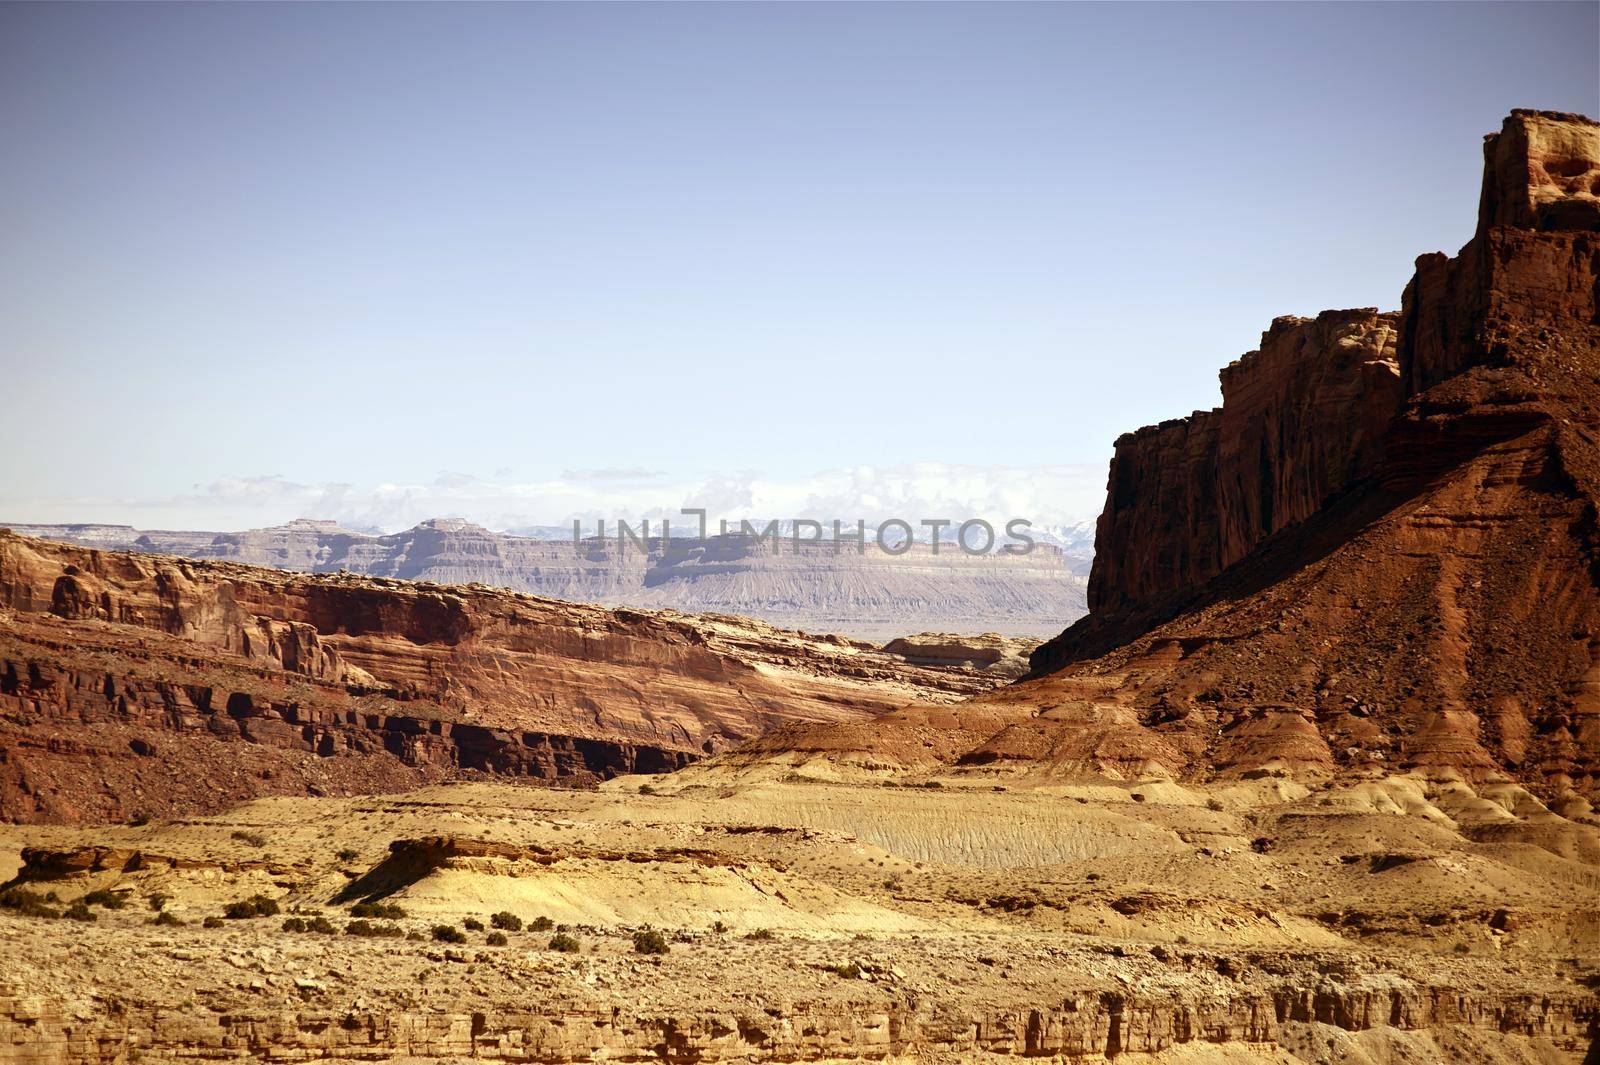 Raw Utah Rocky Landscape. Utah State - United States of America. Utahs Photo Collection. by welcomia